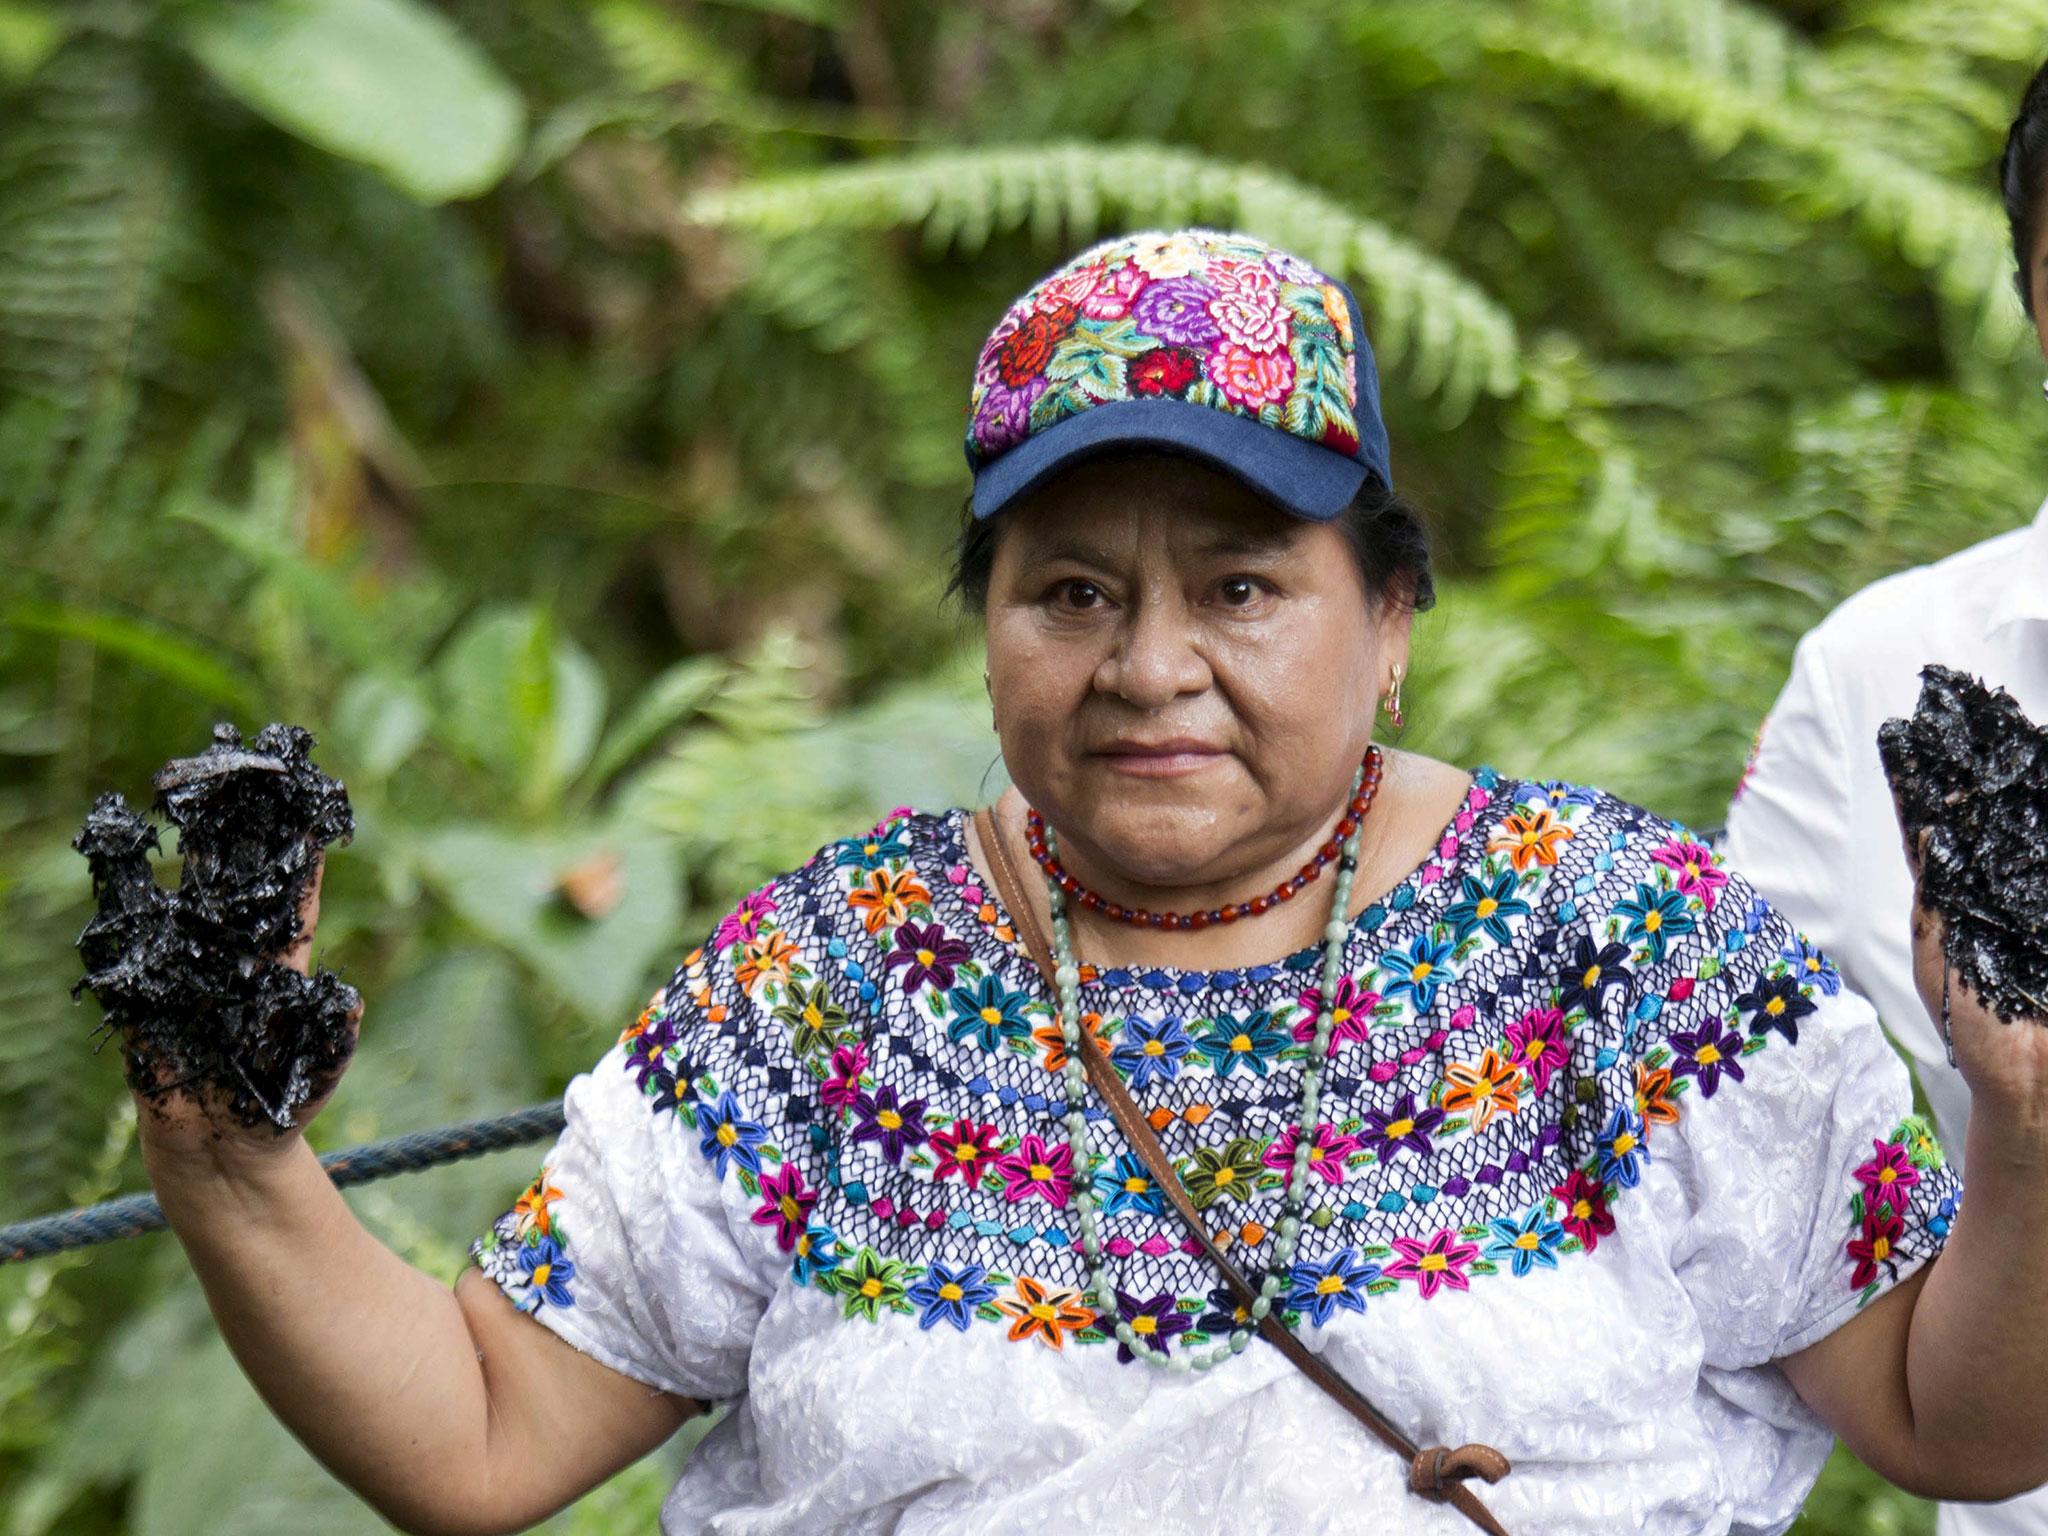 Nobel Peace Prize winner Rigoberta Menchu, an indigenous people’s rights activist, shows her hands covered with oil during a protest in Lago Agrio in Ecuador near the site of oil exploration by Chevron’s Texaco subsidiary